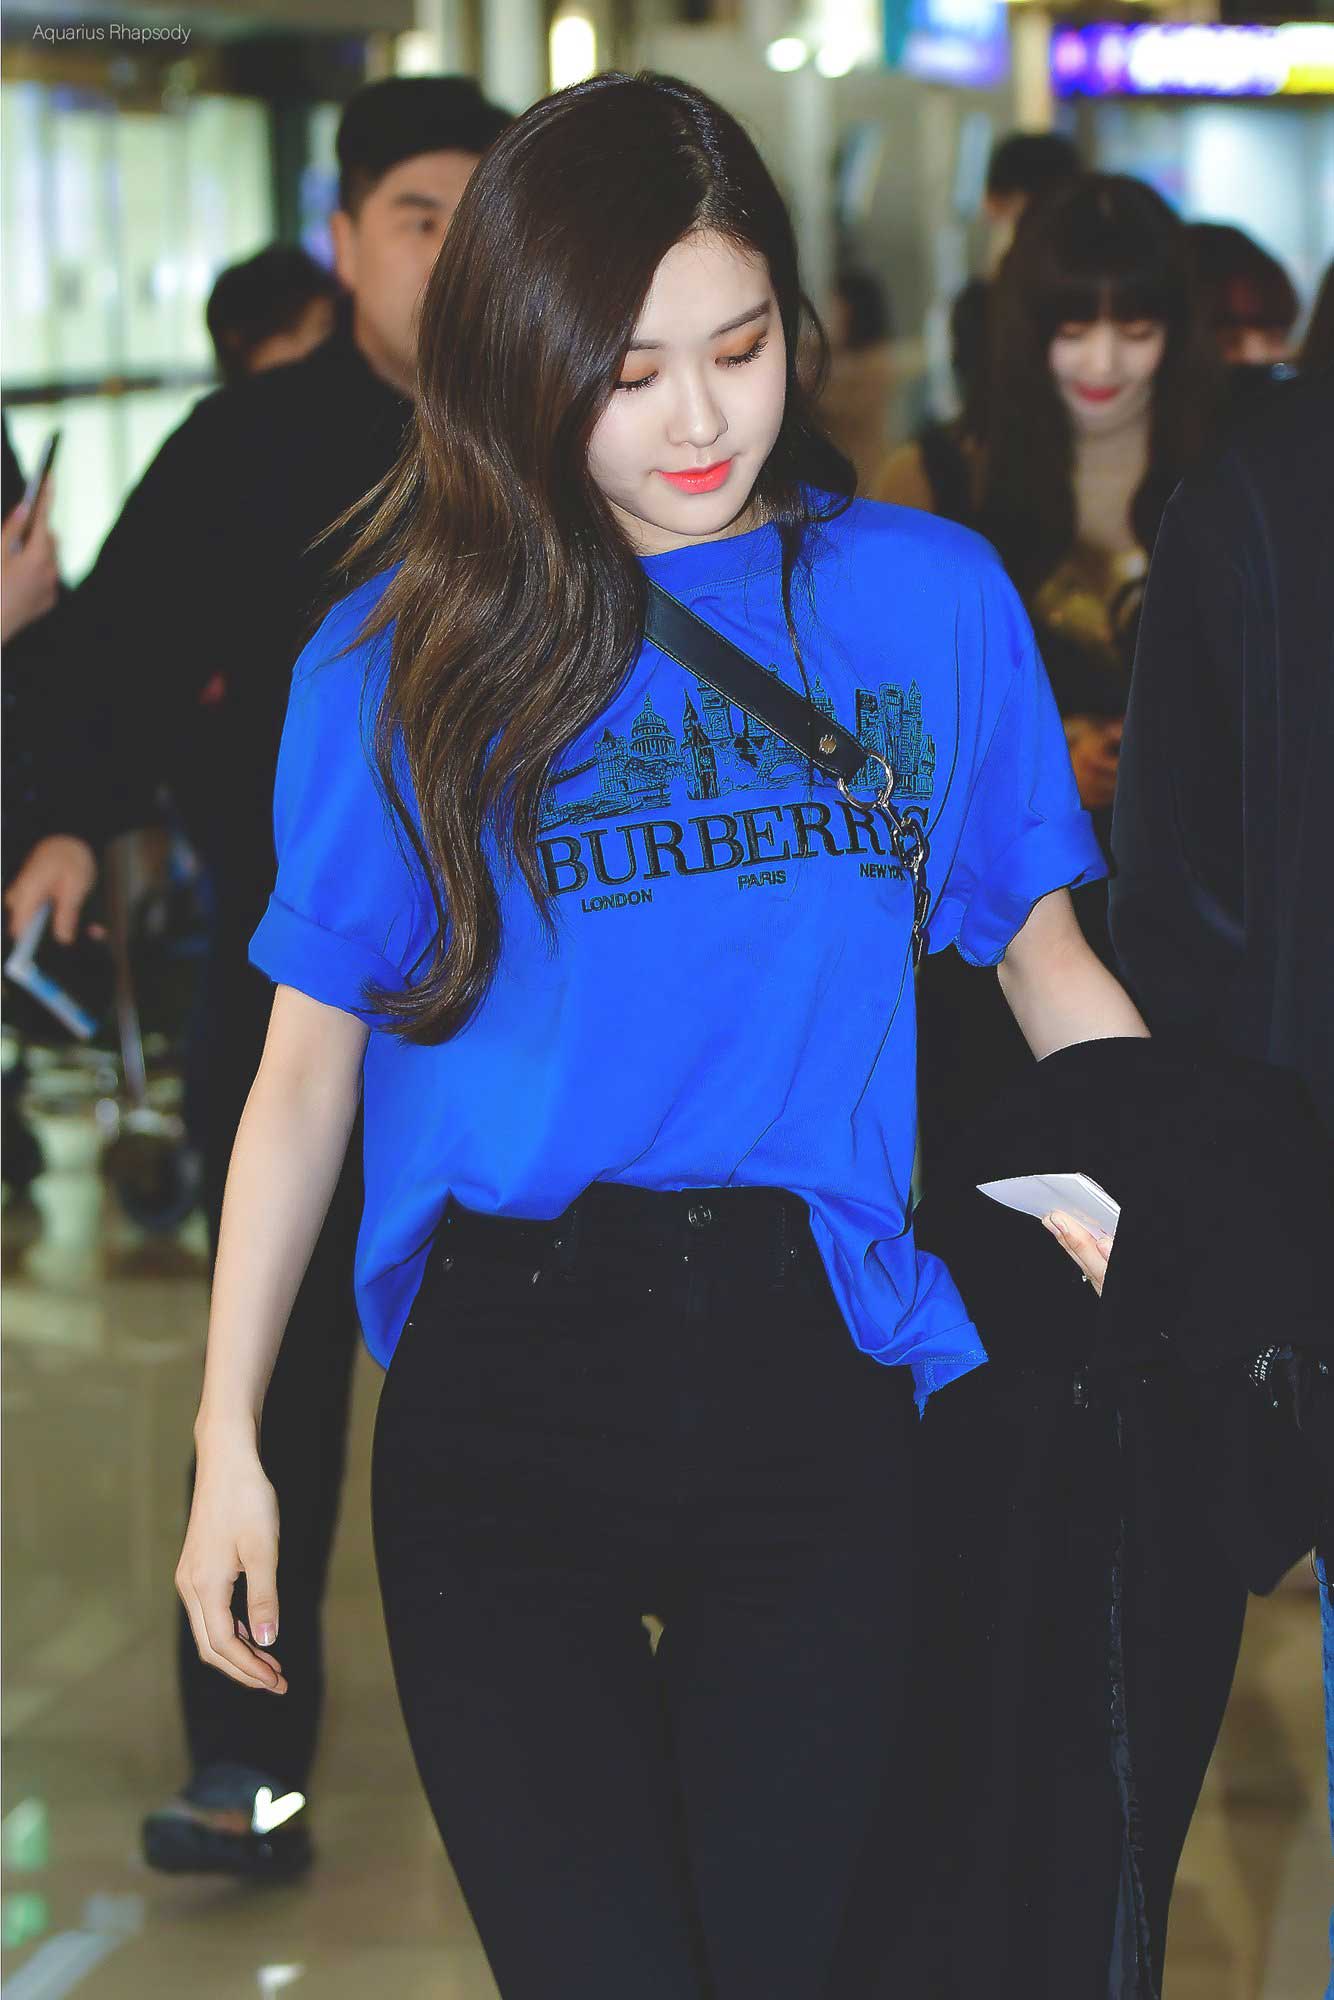 Blackpink Rose Airport Fashion 27 March 2018